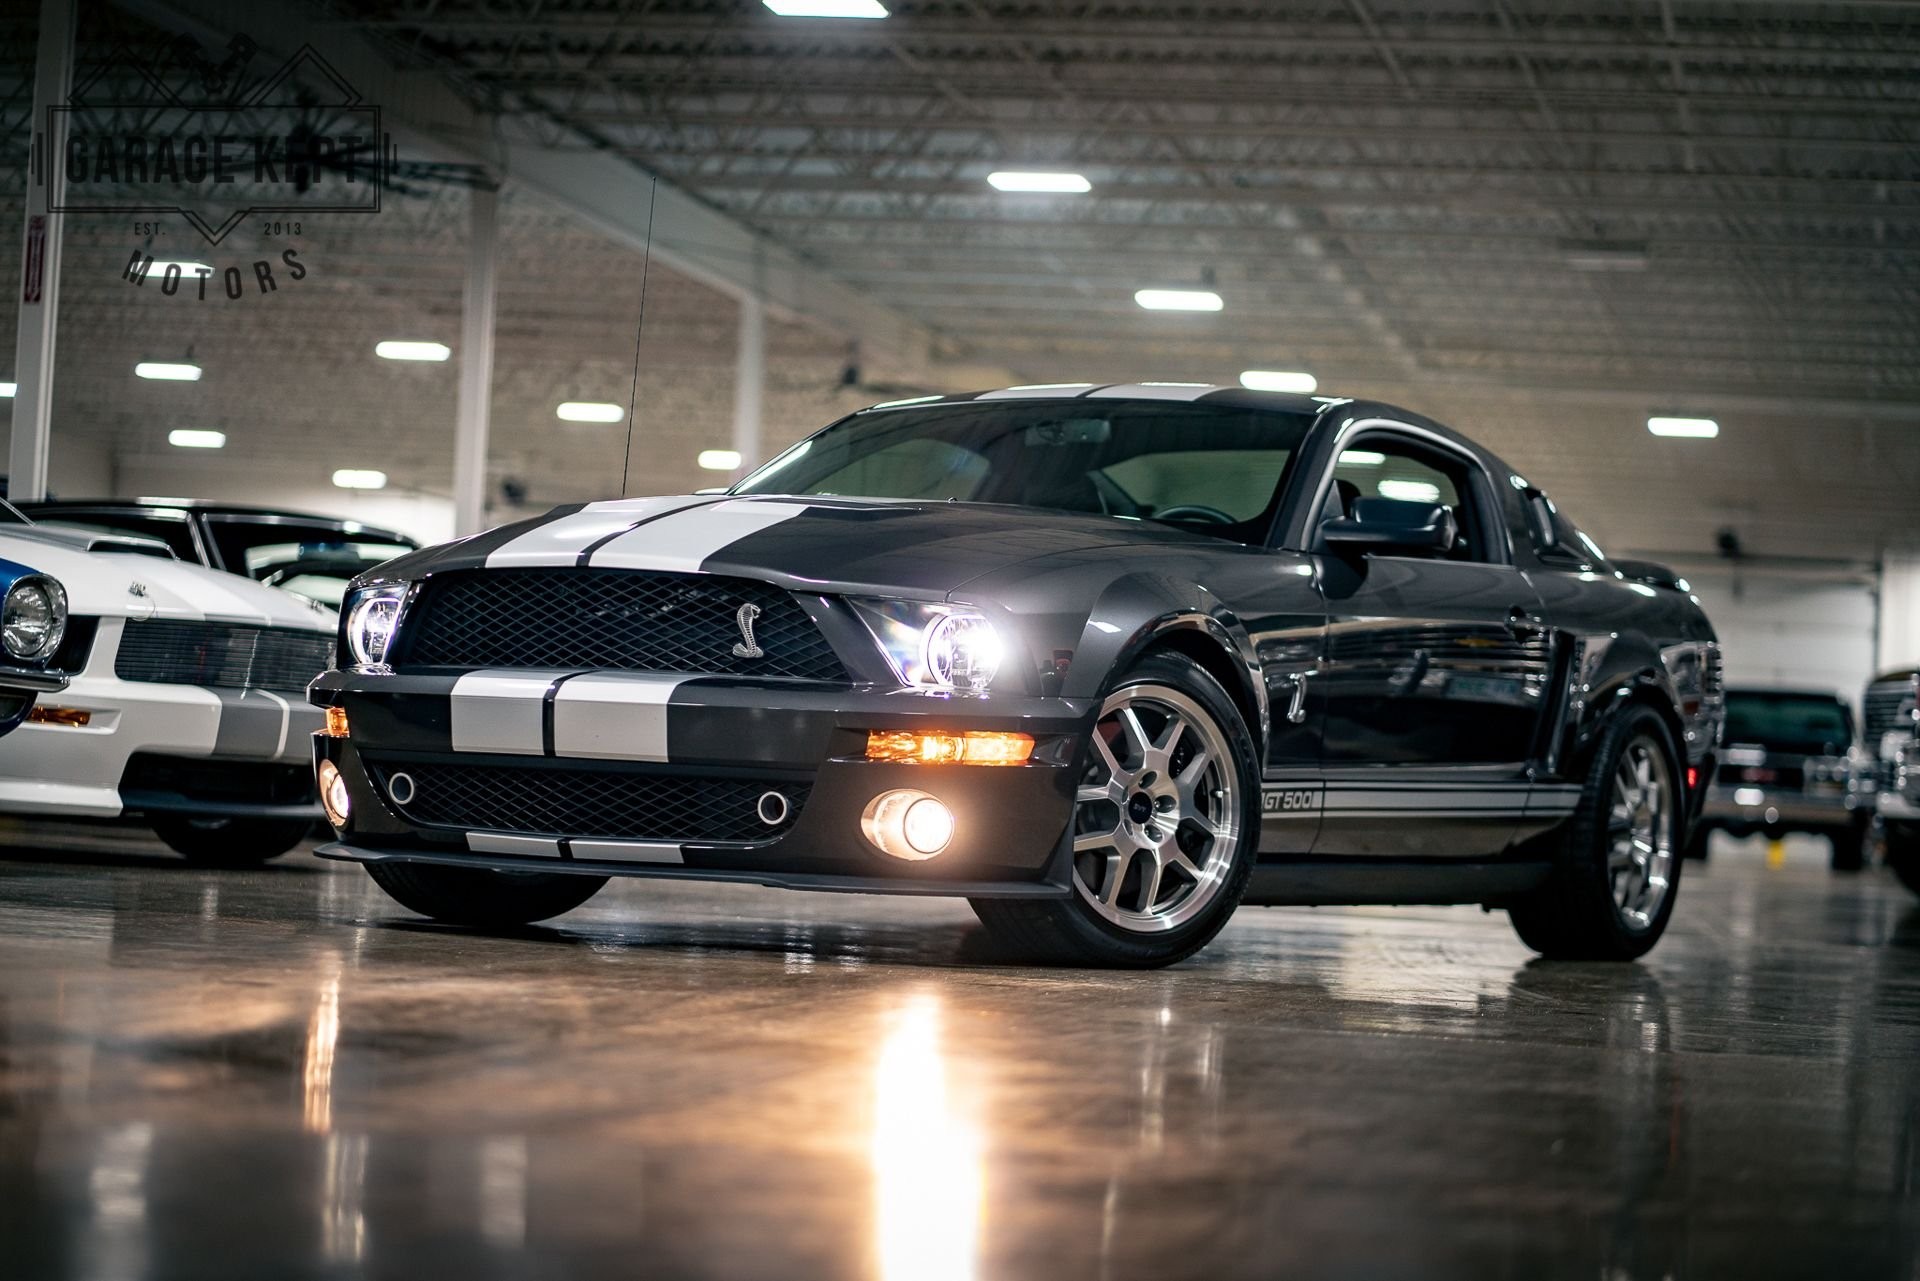 rare-2008-ford-shelby-gt500-hides-svt-lust-under-the-like-new-mileage-cover-179406_1.jpg